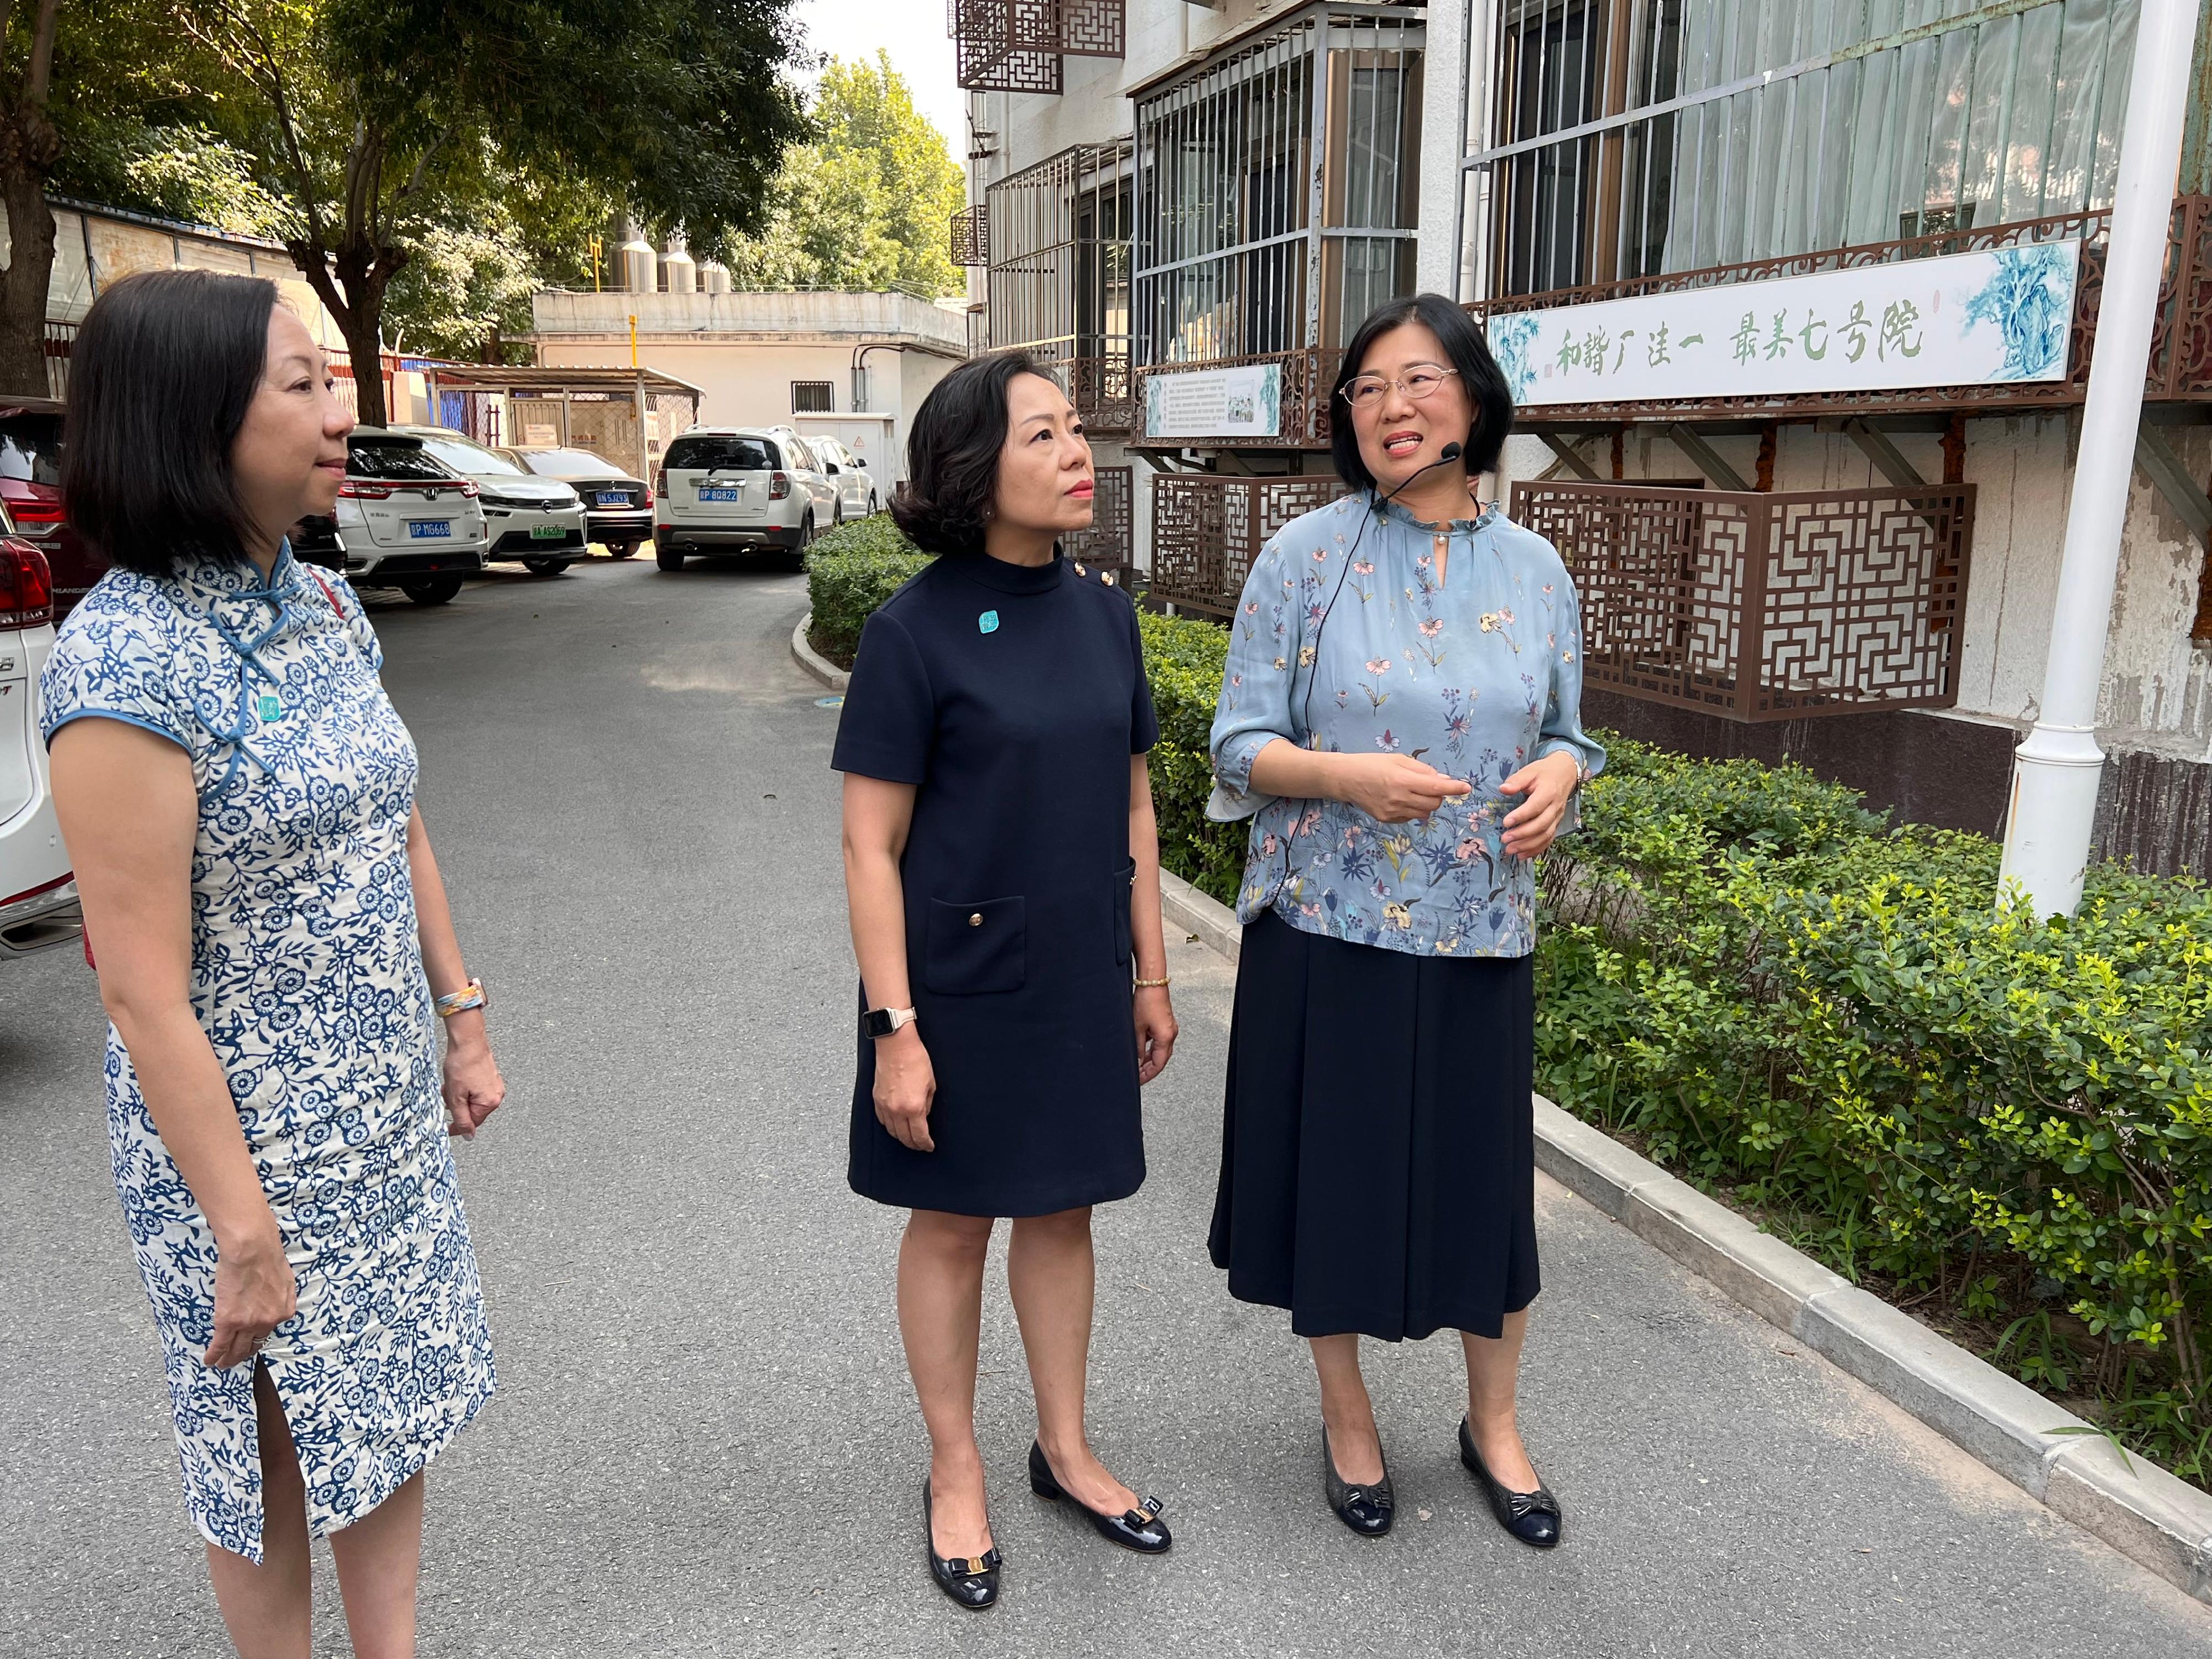 The Secretary for Home and Youth Affairs, Miss Alice Mak, continued her visit in Beijing today (July 18). Photo shows Miss Mak (centre), and the Permanent Secretary for Home and Youth Affairs, Ms Shirley Lam (left), touring Zizhuyuan Street.